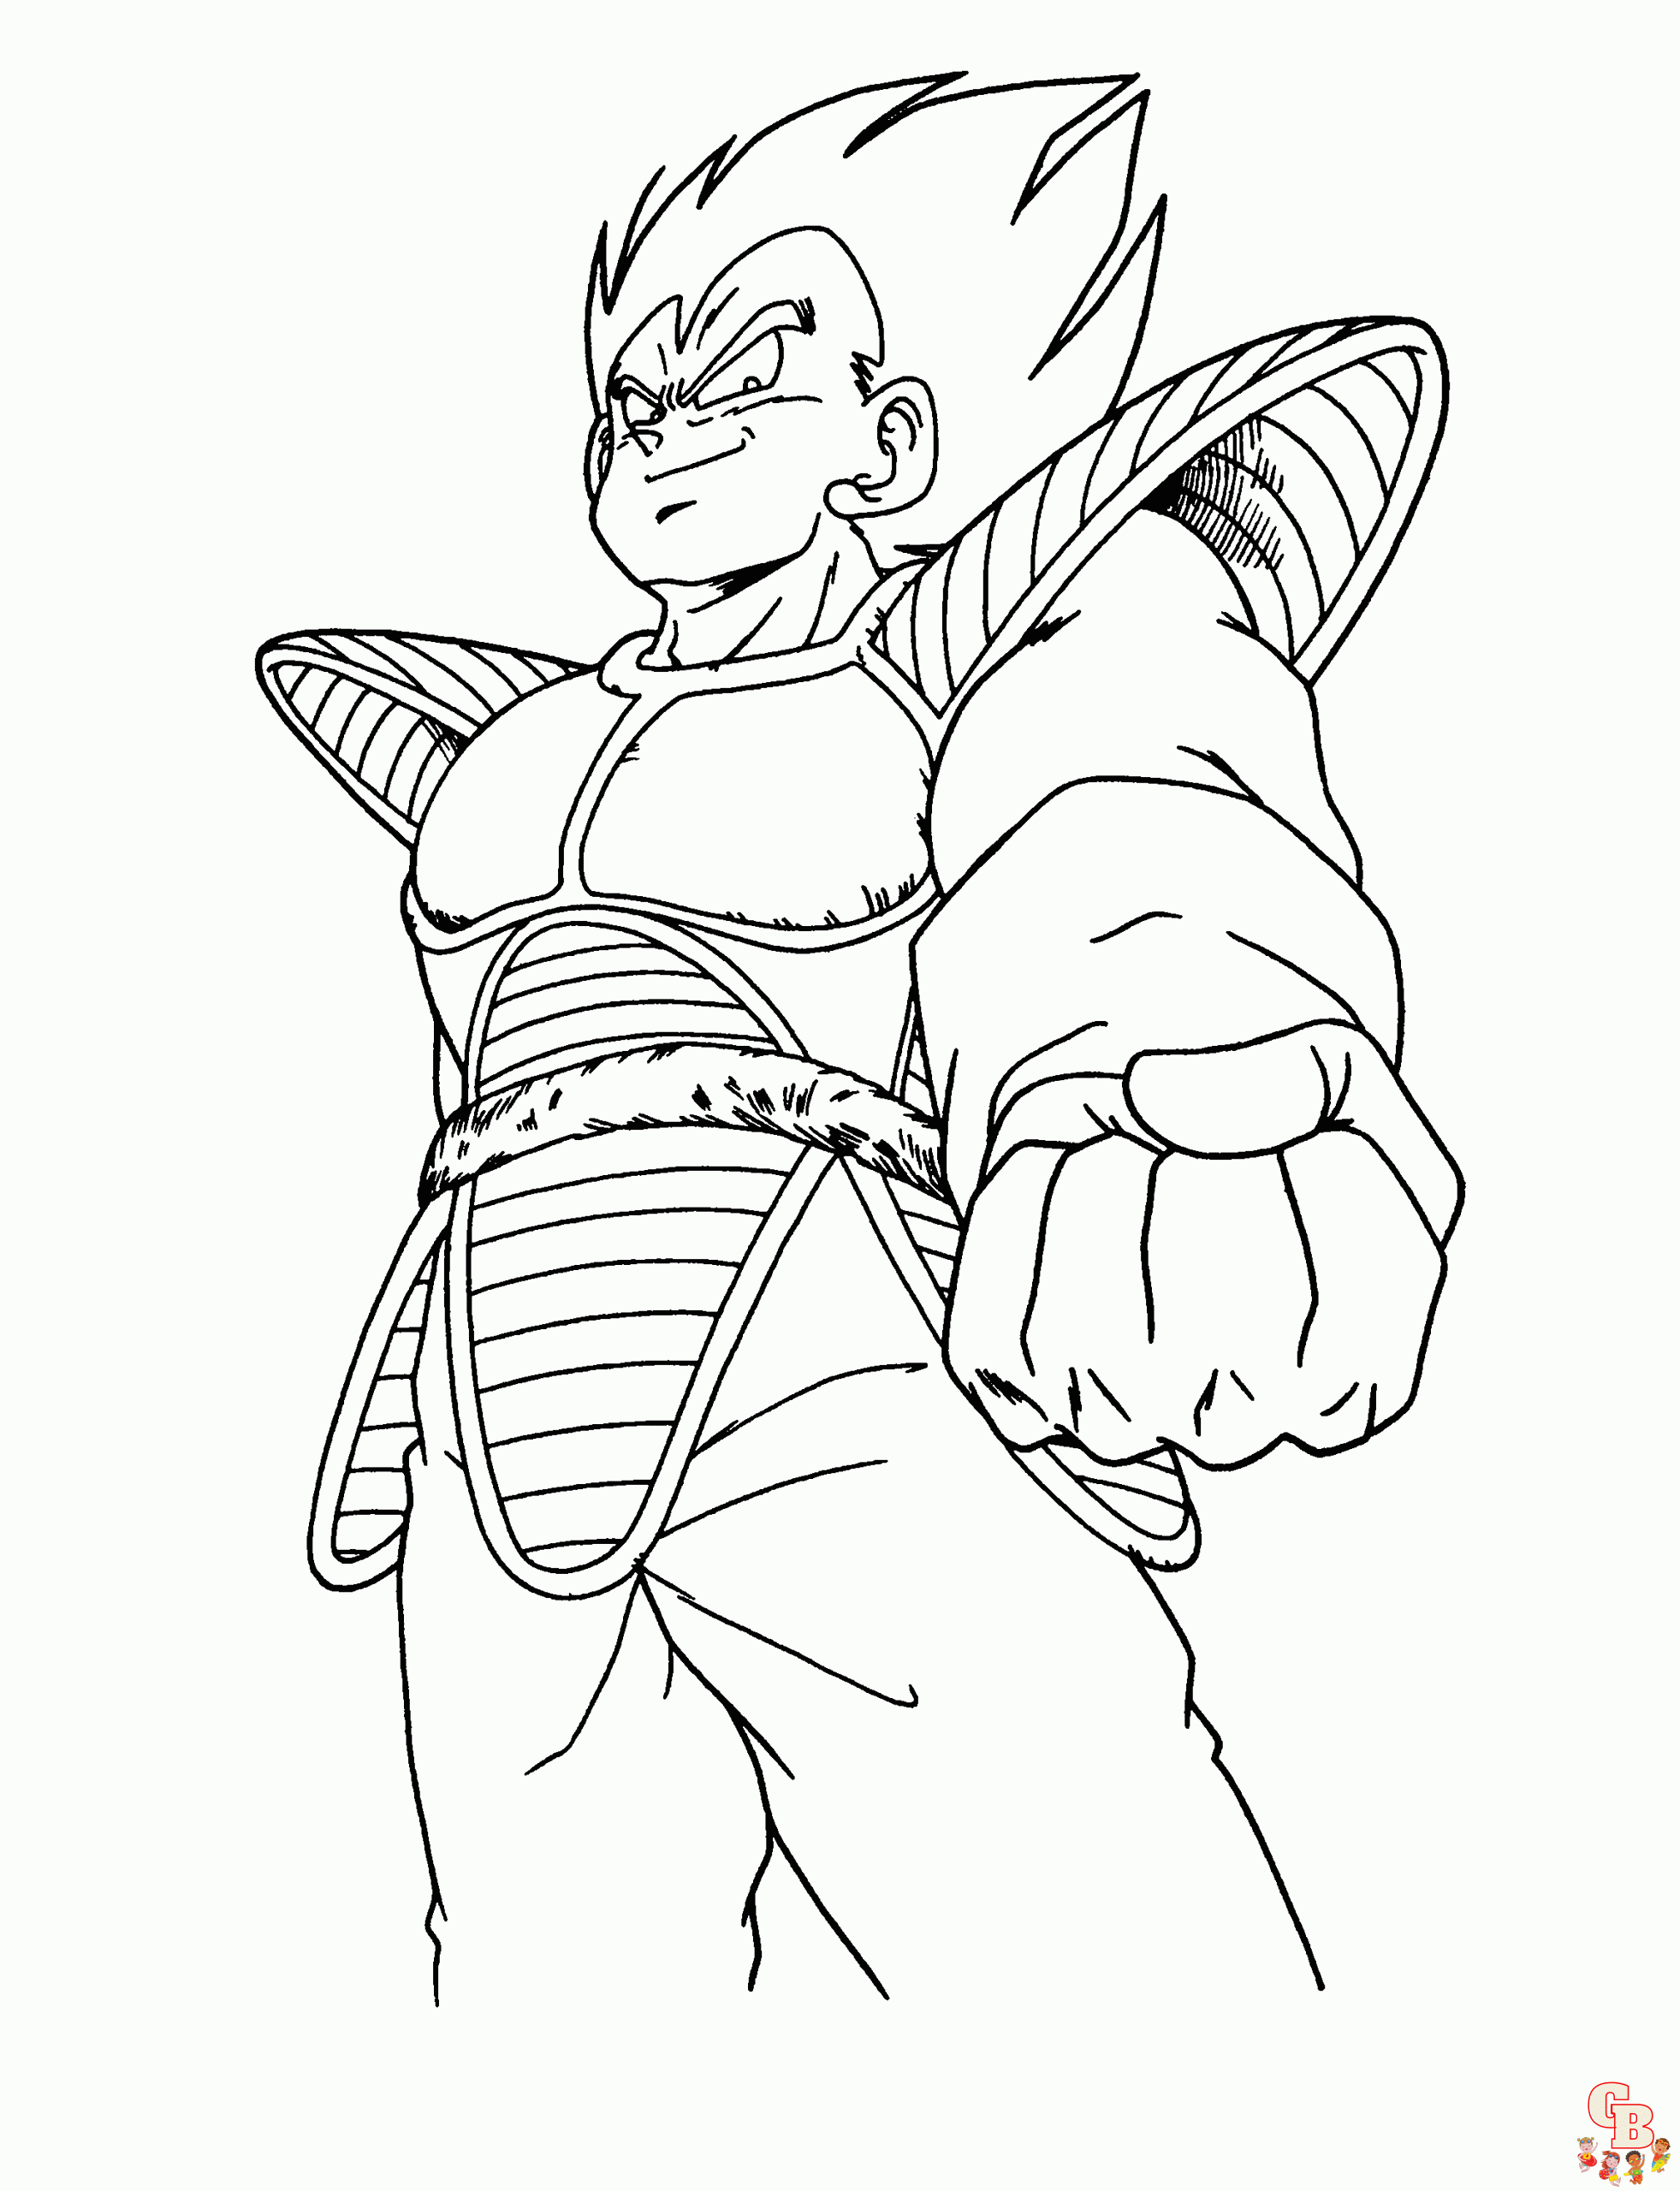 vegeta dragon ball z coloring pages 1